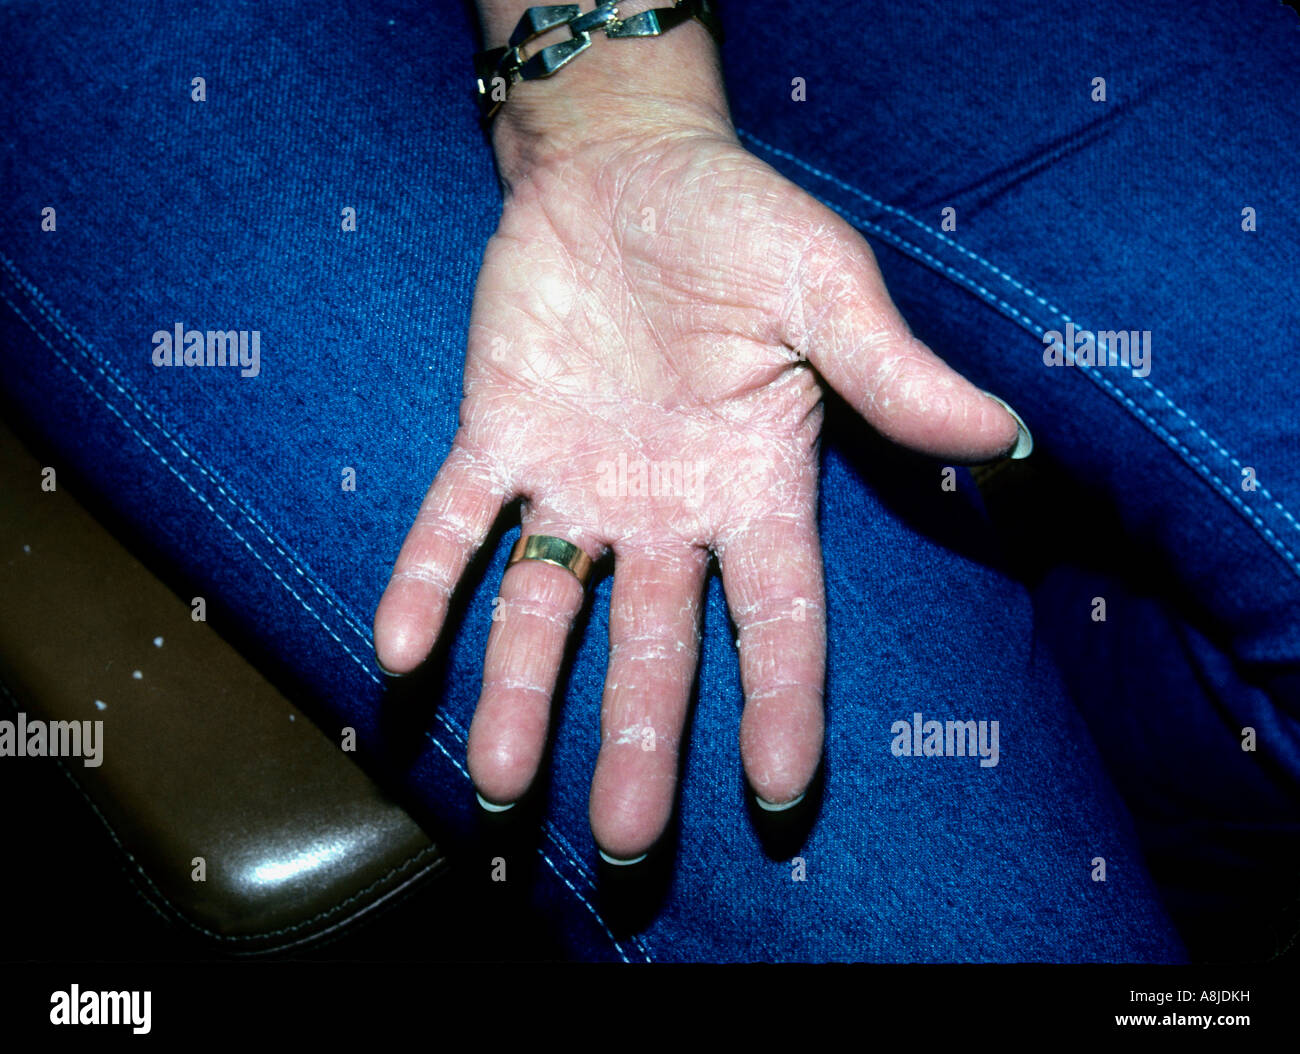 Fungus Infection Called Tinea Manus On The Hand Also Known As Ringworm